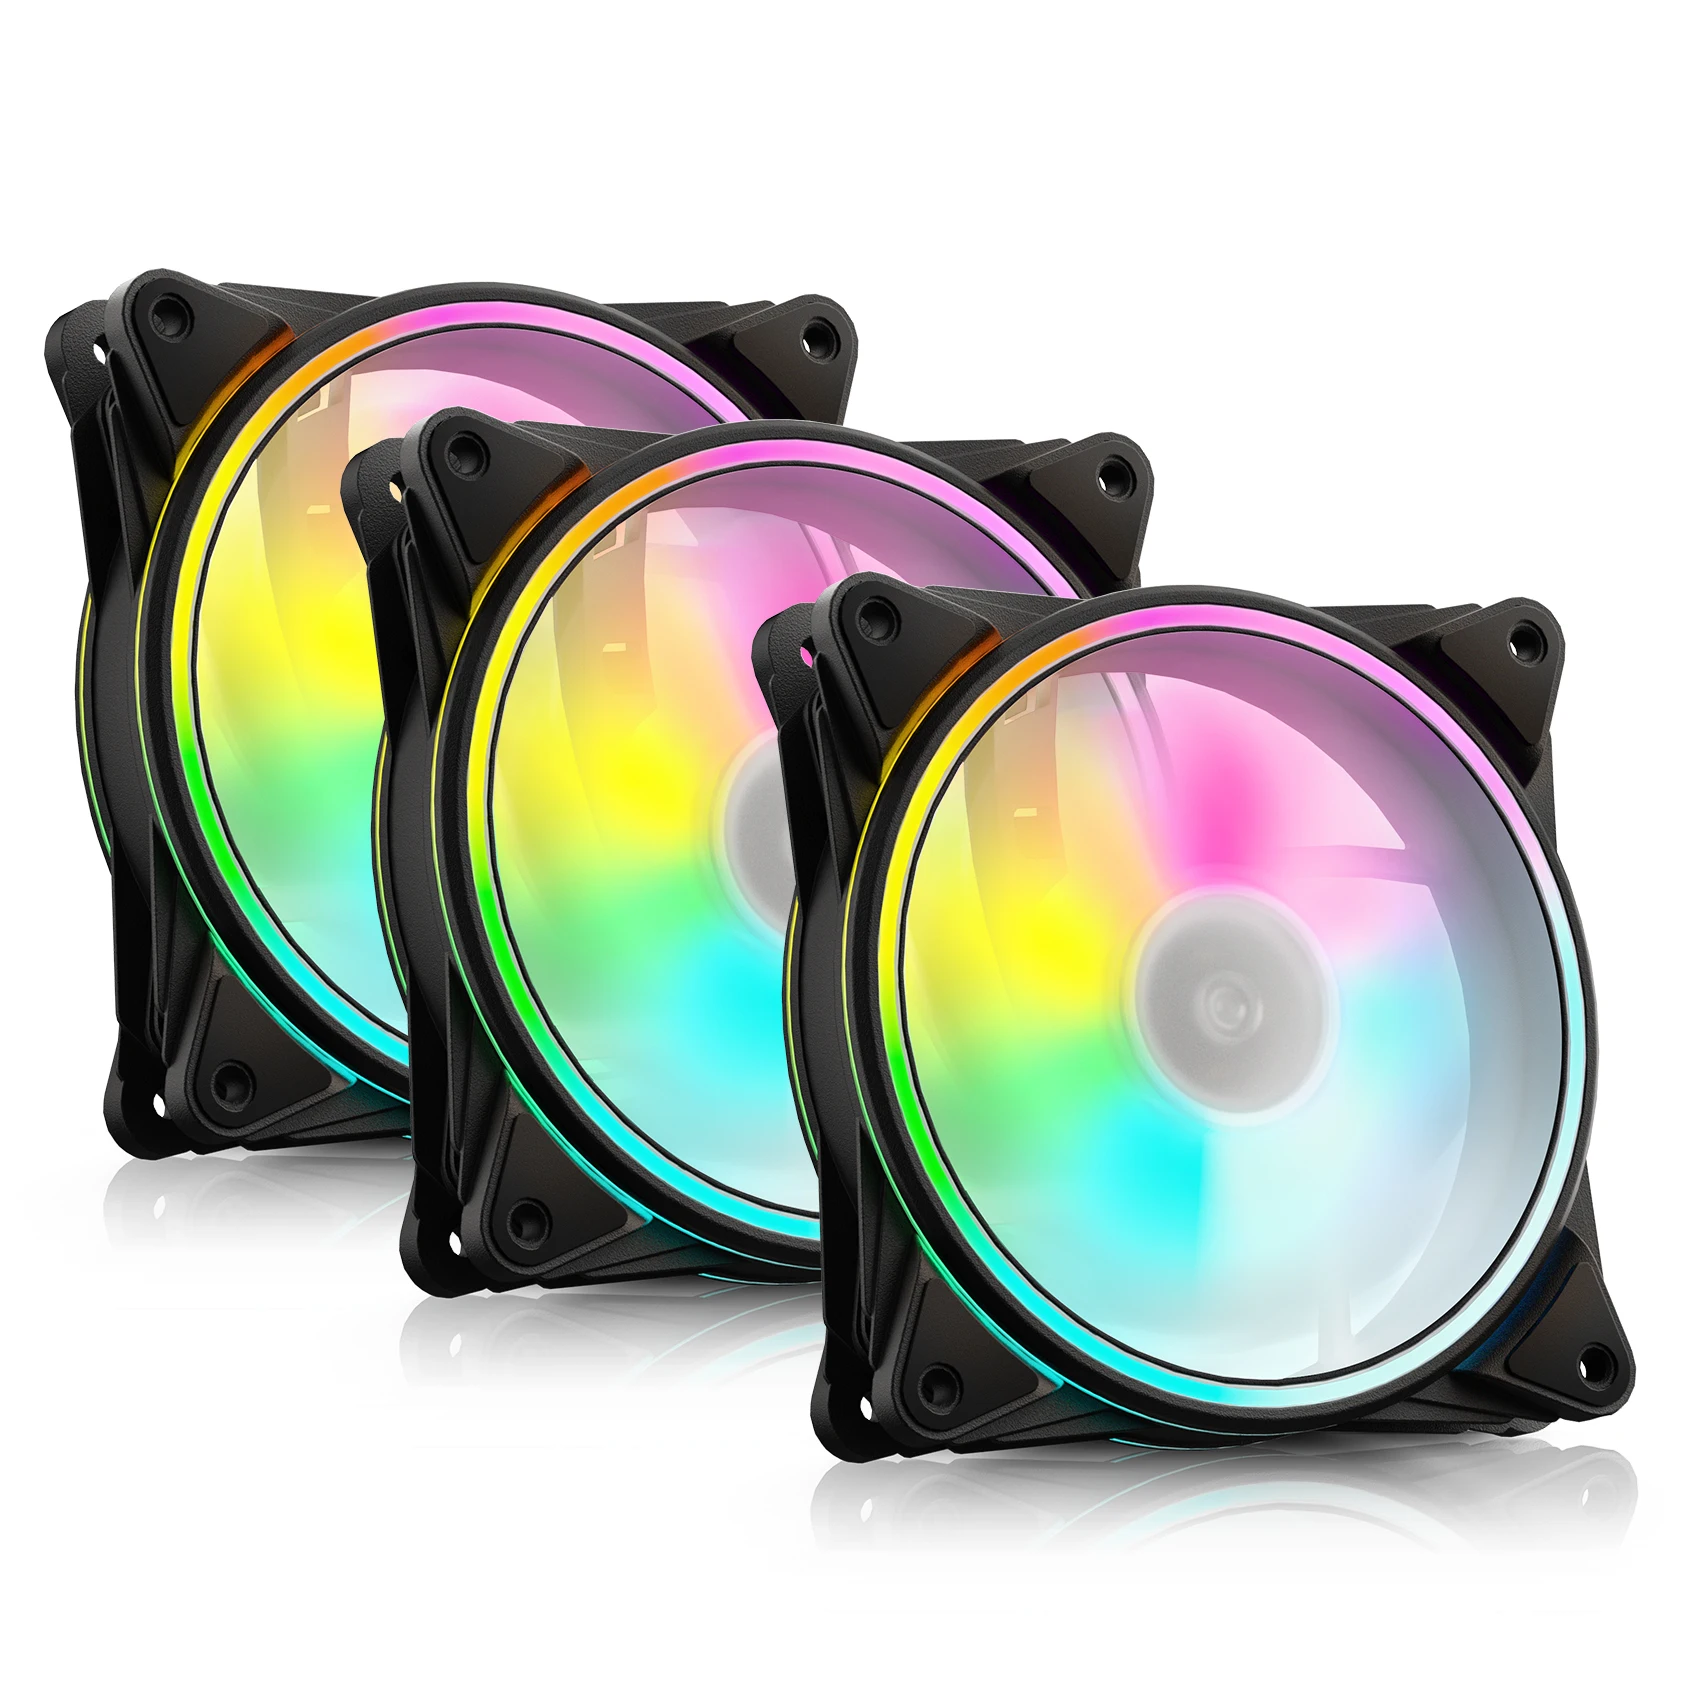 

ASIAHORSE PWM CPU Cooler 120mm DIY Computer Case Water Cooling RGB Fan Kit for PC